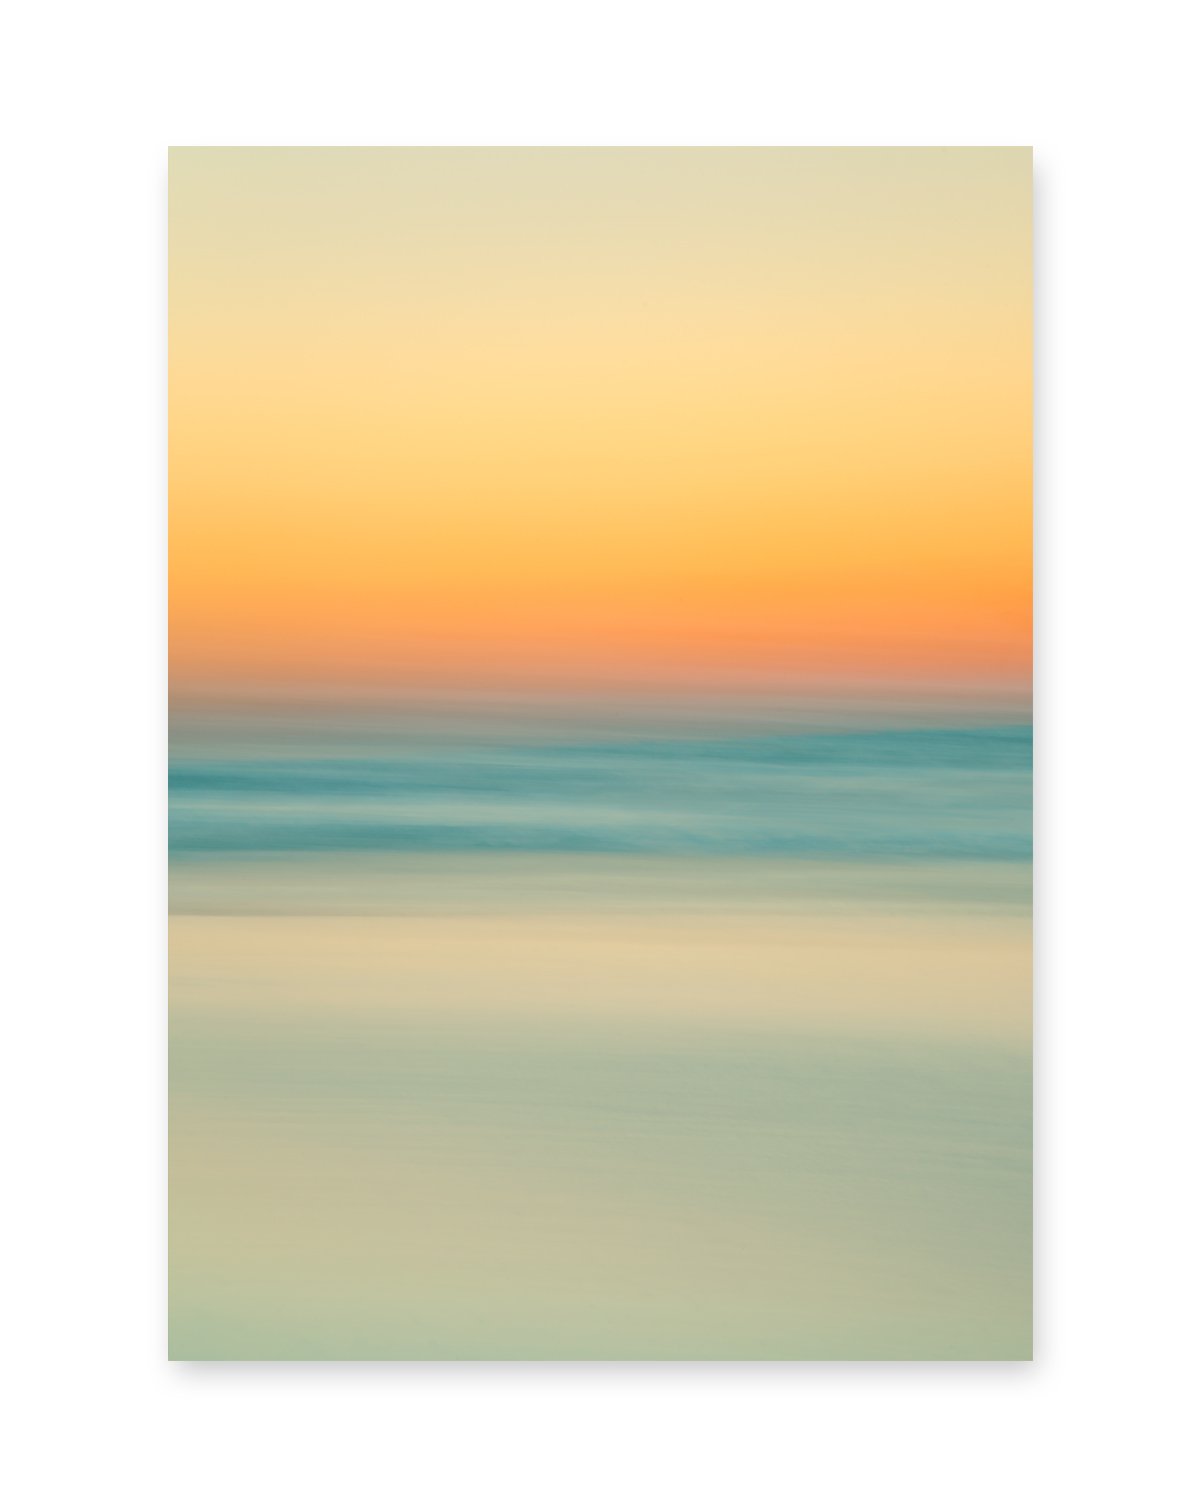 abstract minimal print, sunrise beach photograph by Wright and Roam